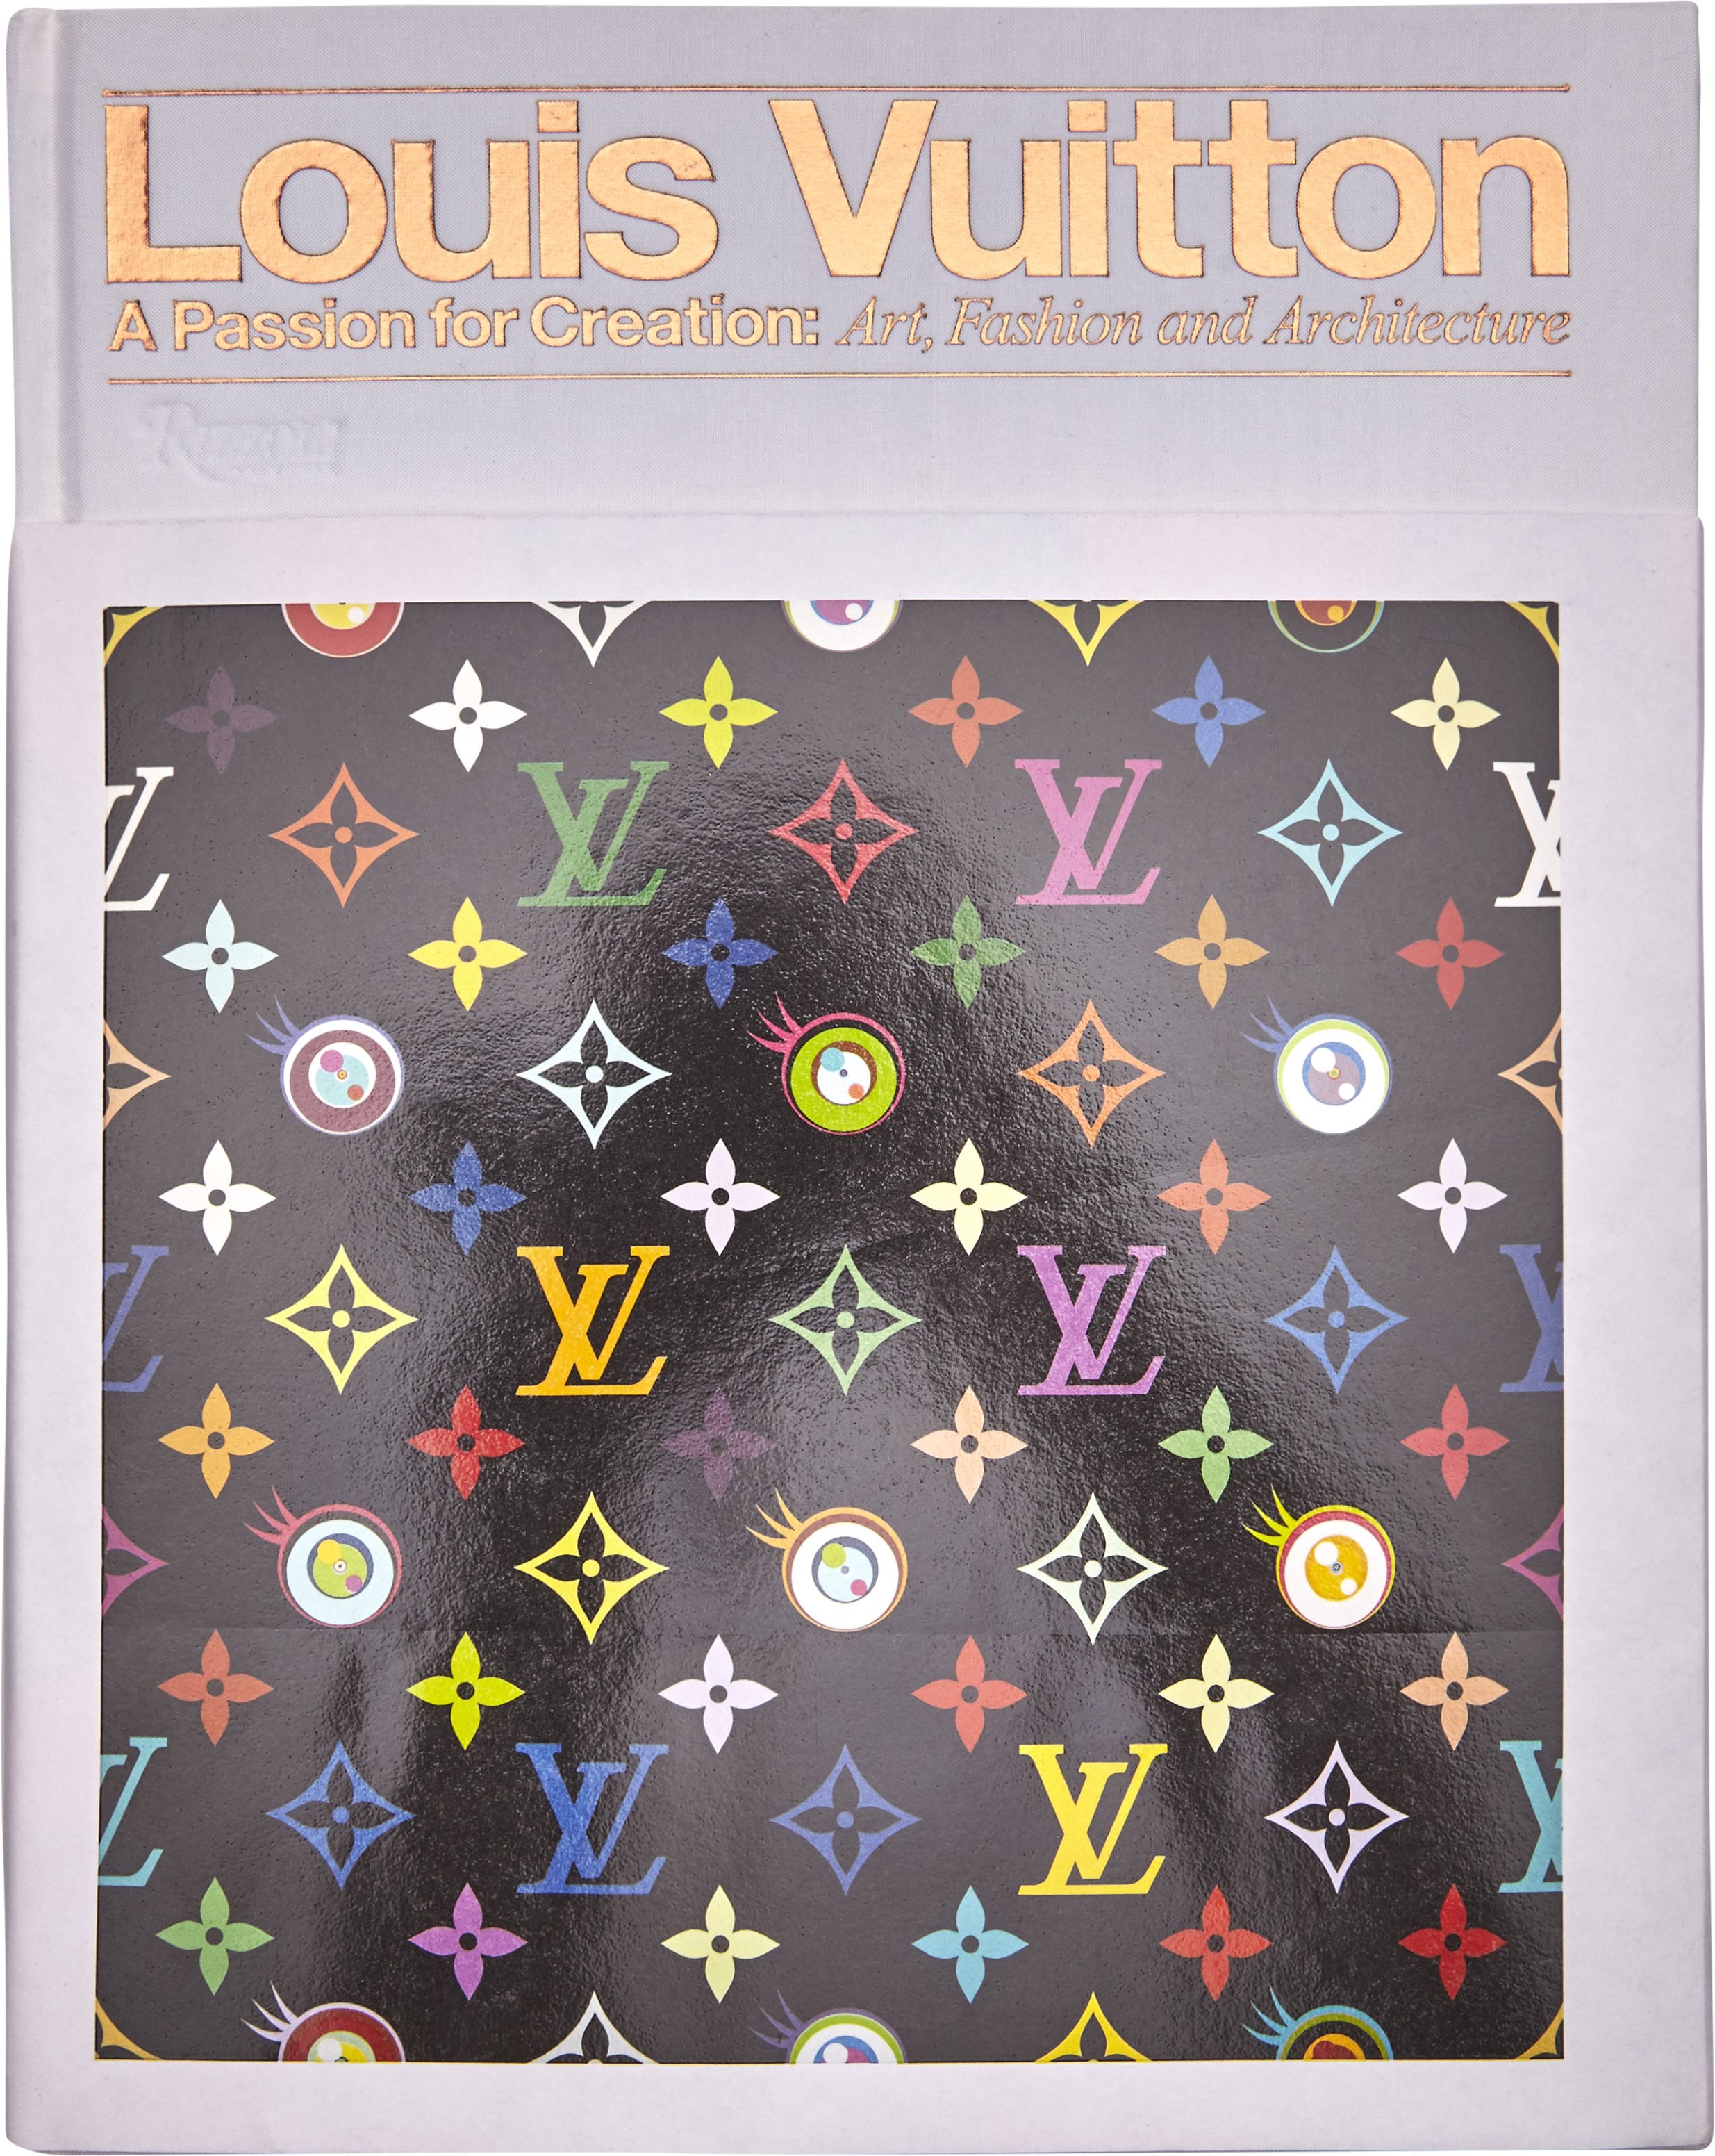 LOUIS VUITTON - A PASSION FOR CREATION RI1026 fra New 1000 DKK